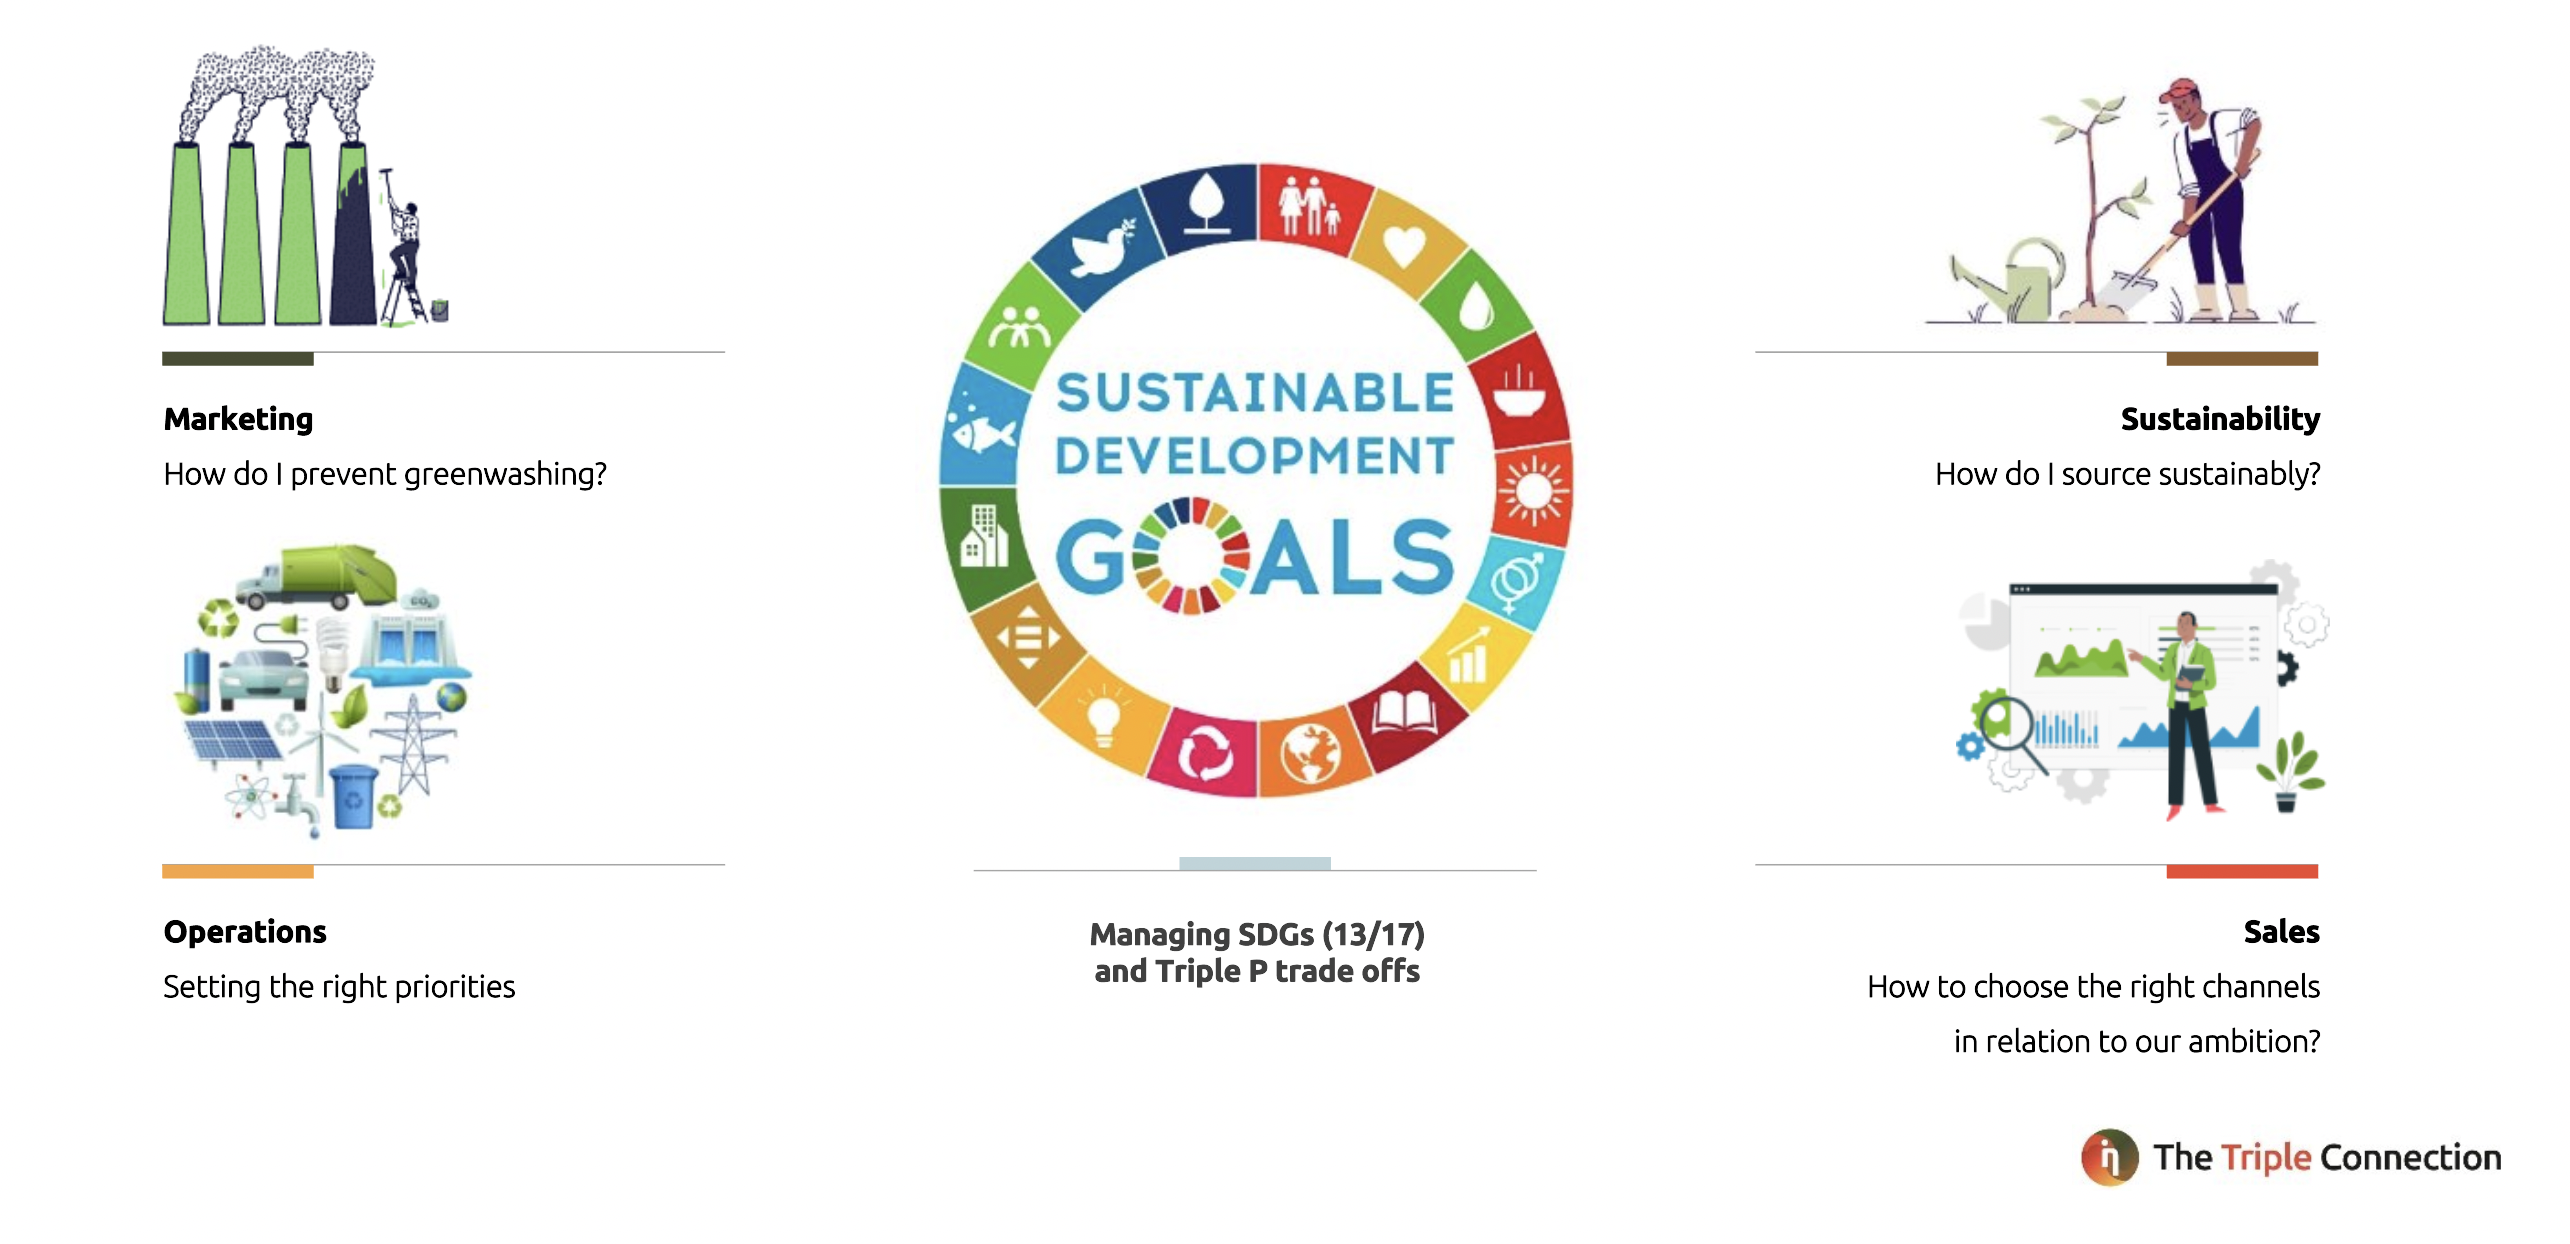 The goal of the game is to manage 13 out of 17 Sustainable Development Goals, while also having limitations specific to each participant's role, like setting the right priorities in an Operations Role, or sourcing sustainably in a Sustainability Position role